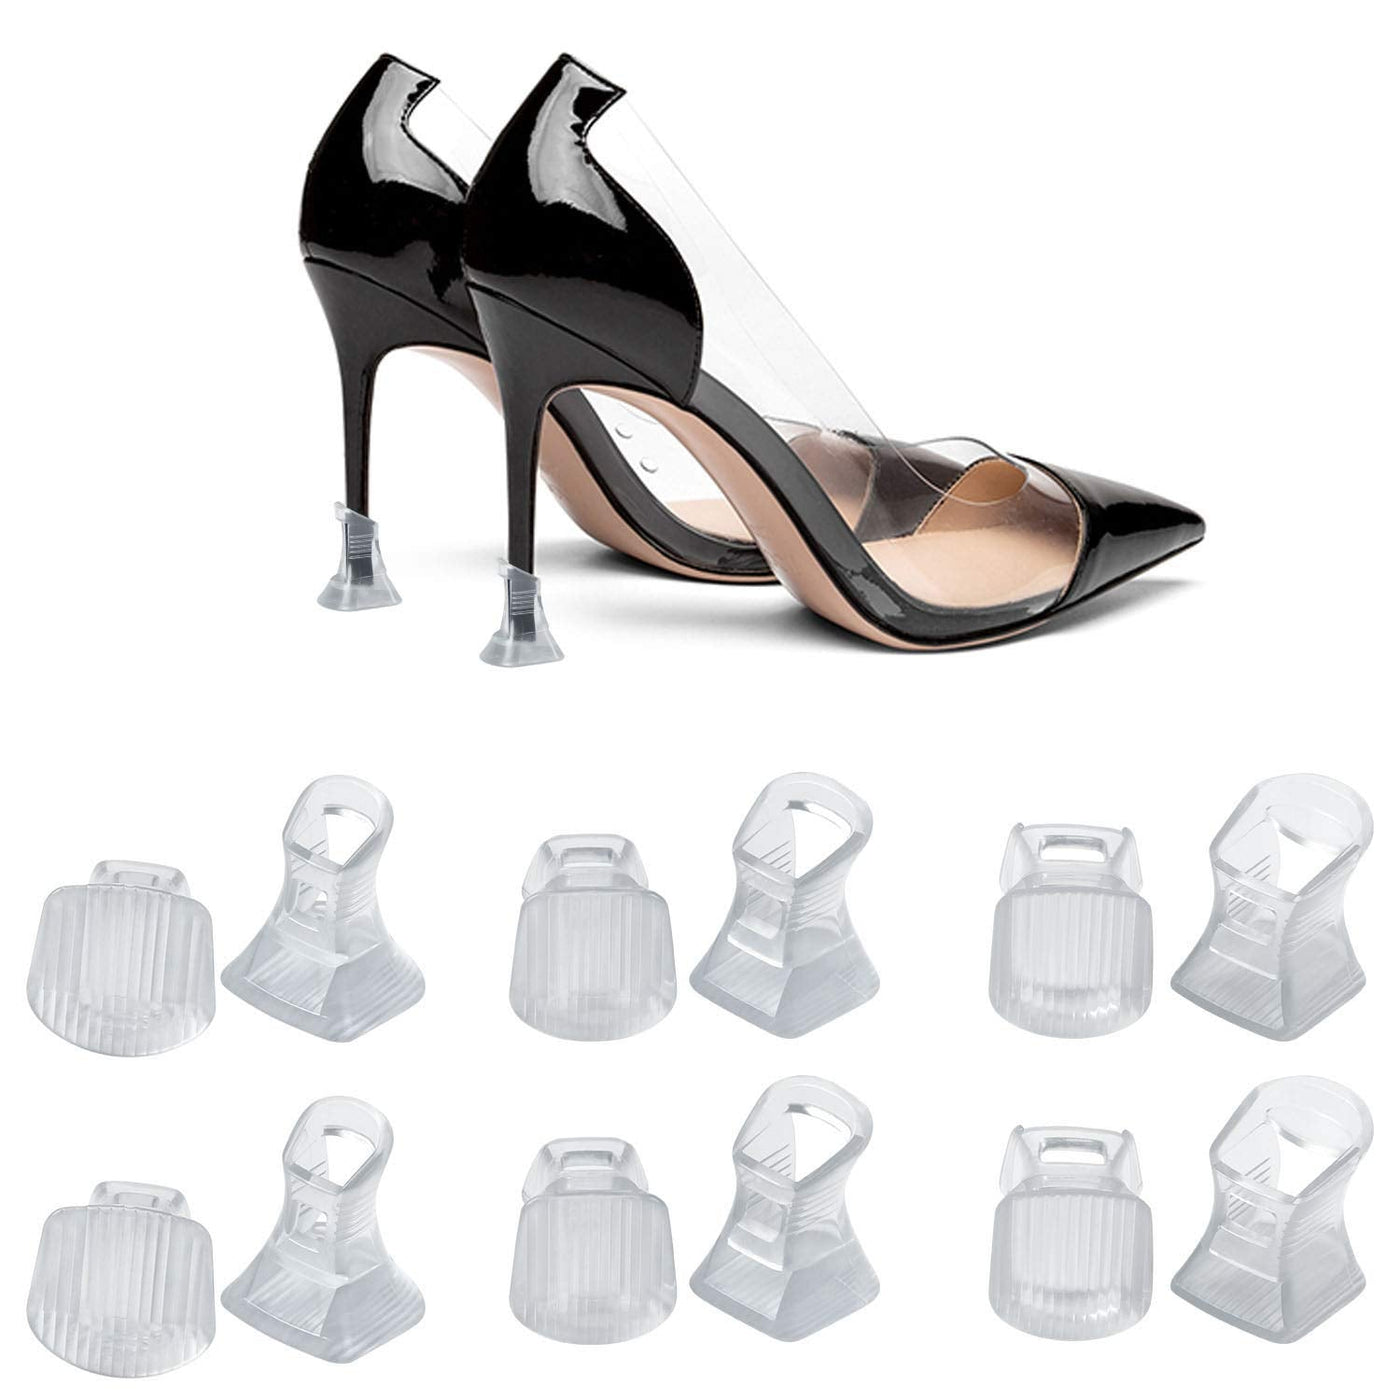 Heels Above High Heel Protectors (2 Pairs) Plus Bonus Carrying Pouch -  Never Sink into Grass Again. | Heel protector, Heels, High heels